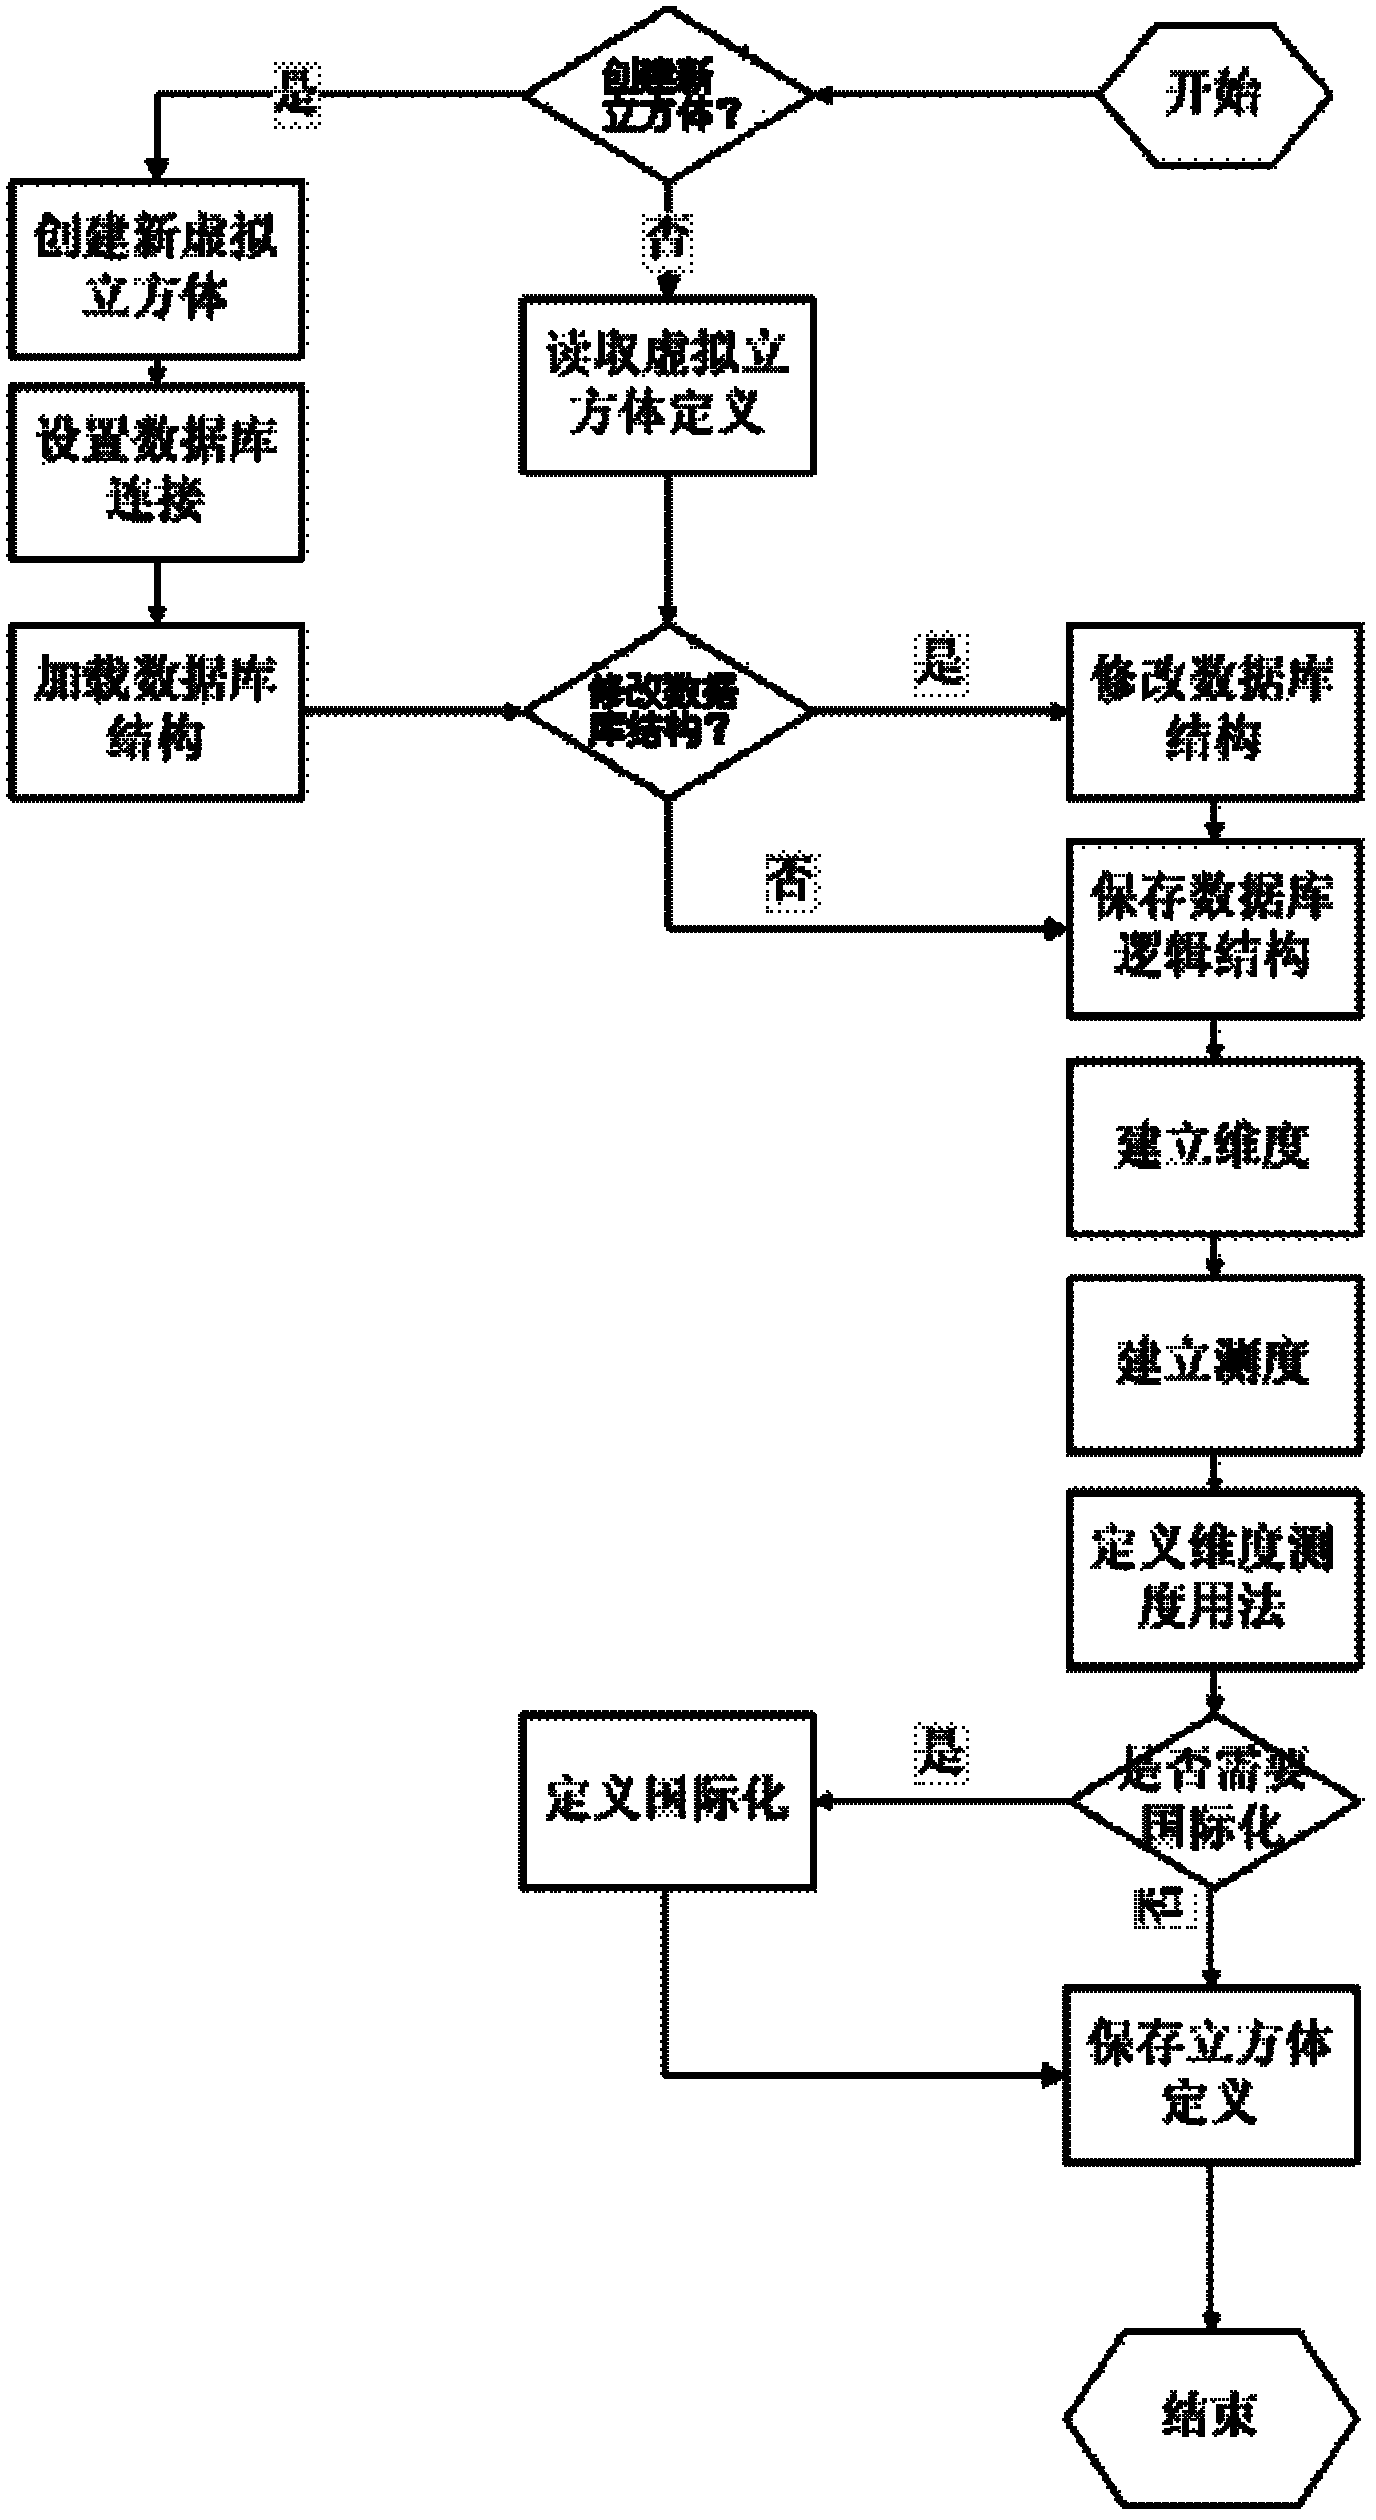 Method for processing multi-dimensional data based on virtual data cube and system of method